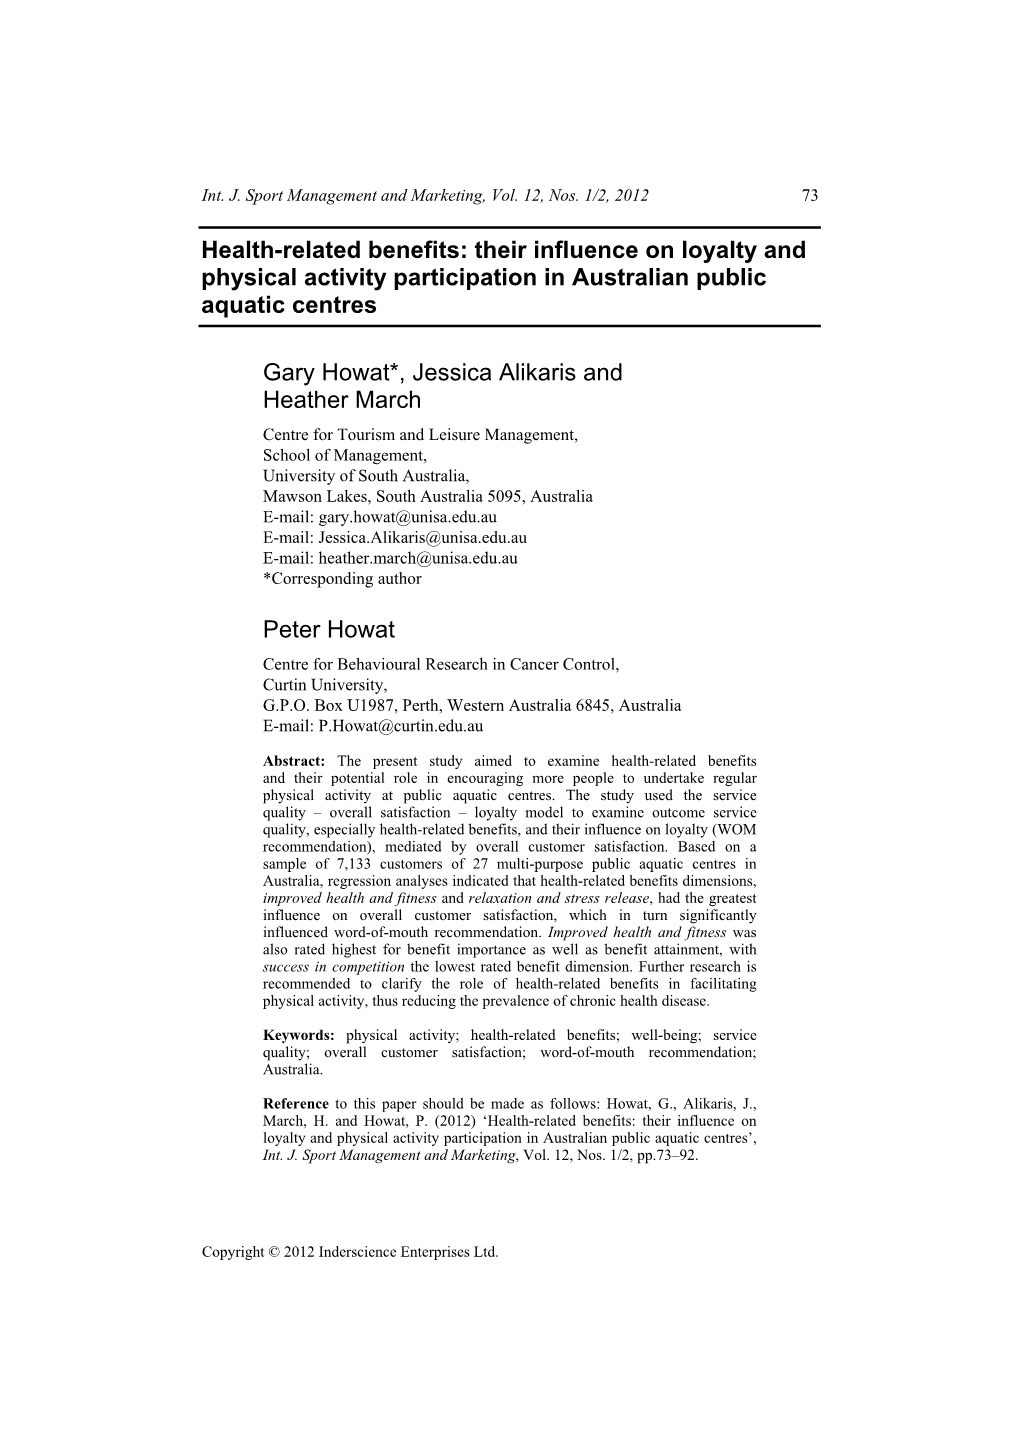 Health-Related Benefits: Their Influence on Loyalty and Physical Activity Participation in Australian Public Aquatic Centres